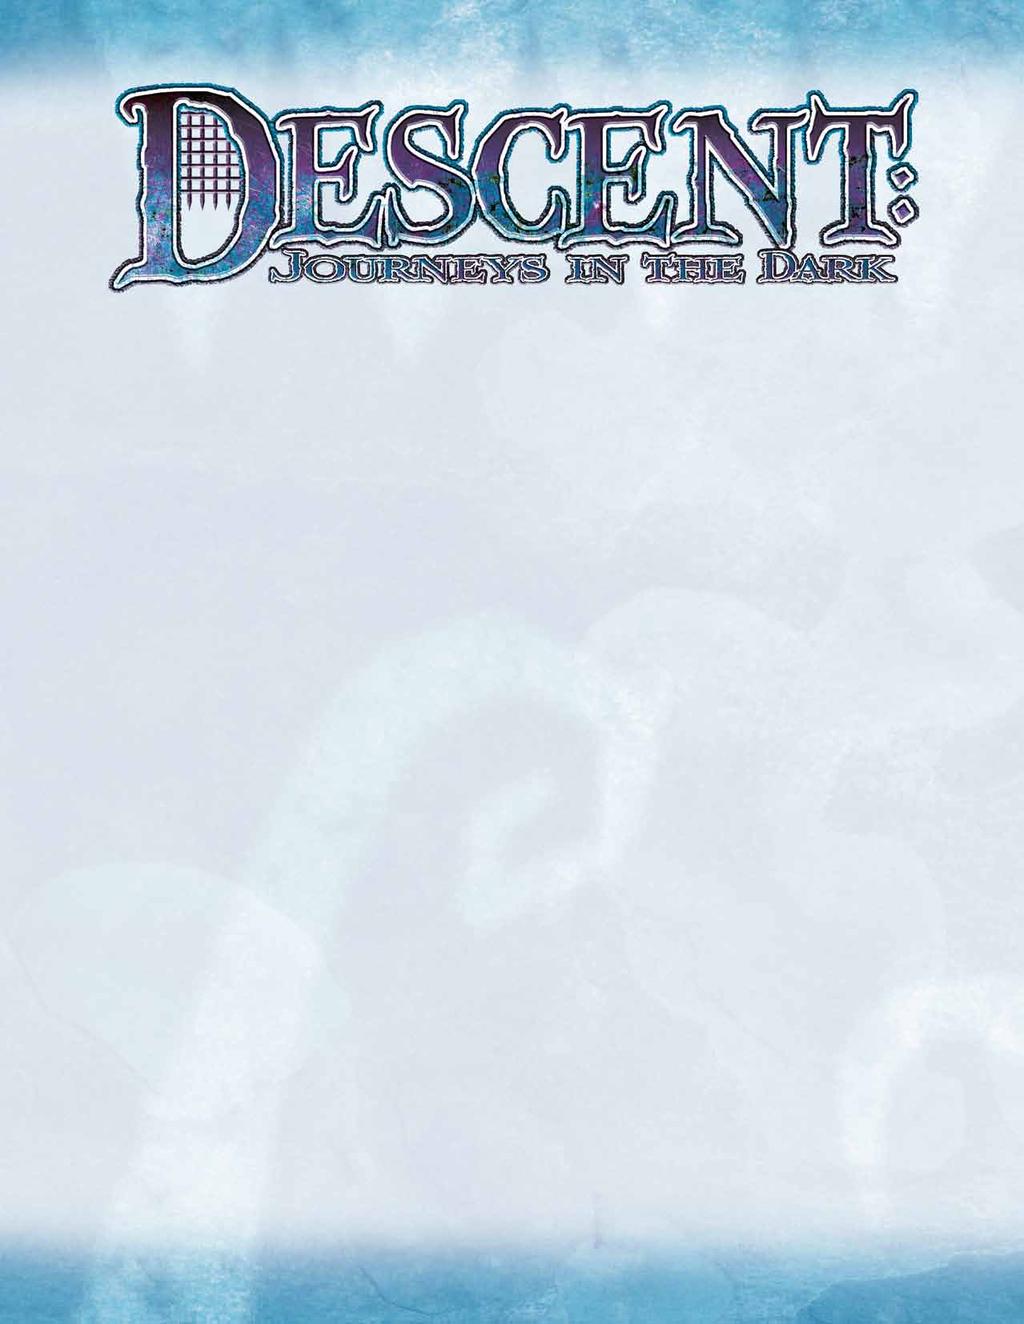 Following are the frequently asked questions, errata, and clarifications for first edition of the Descent: Journeys in the Dark board game.